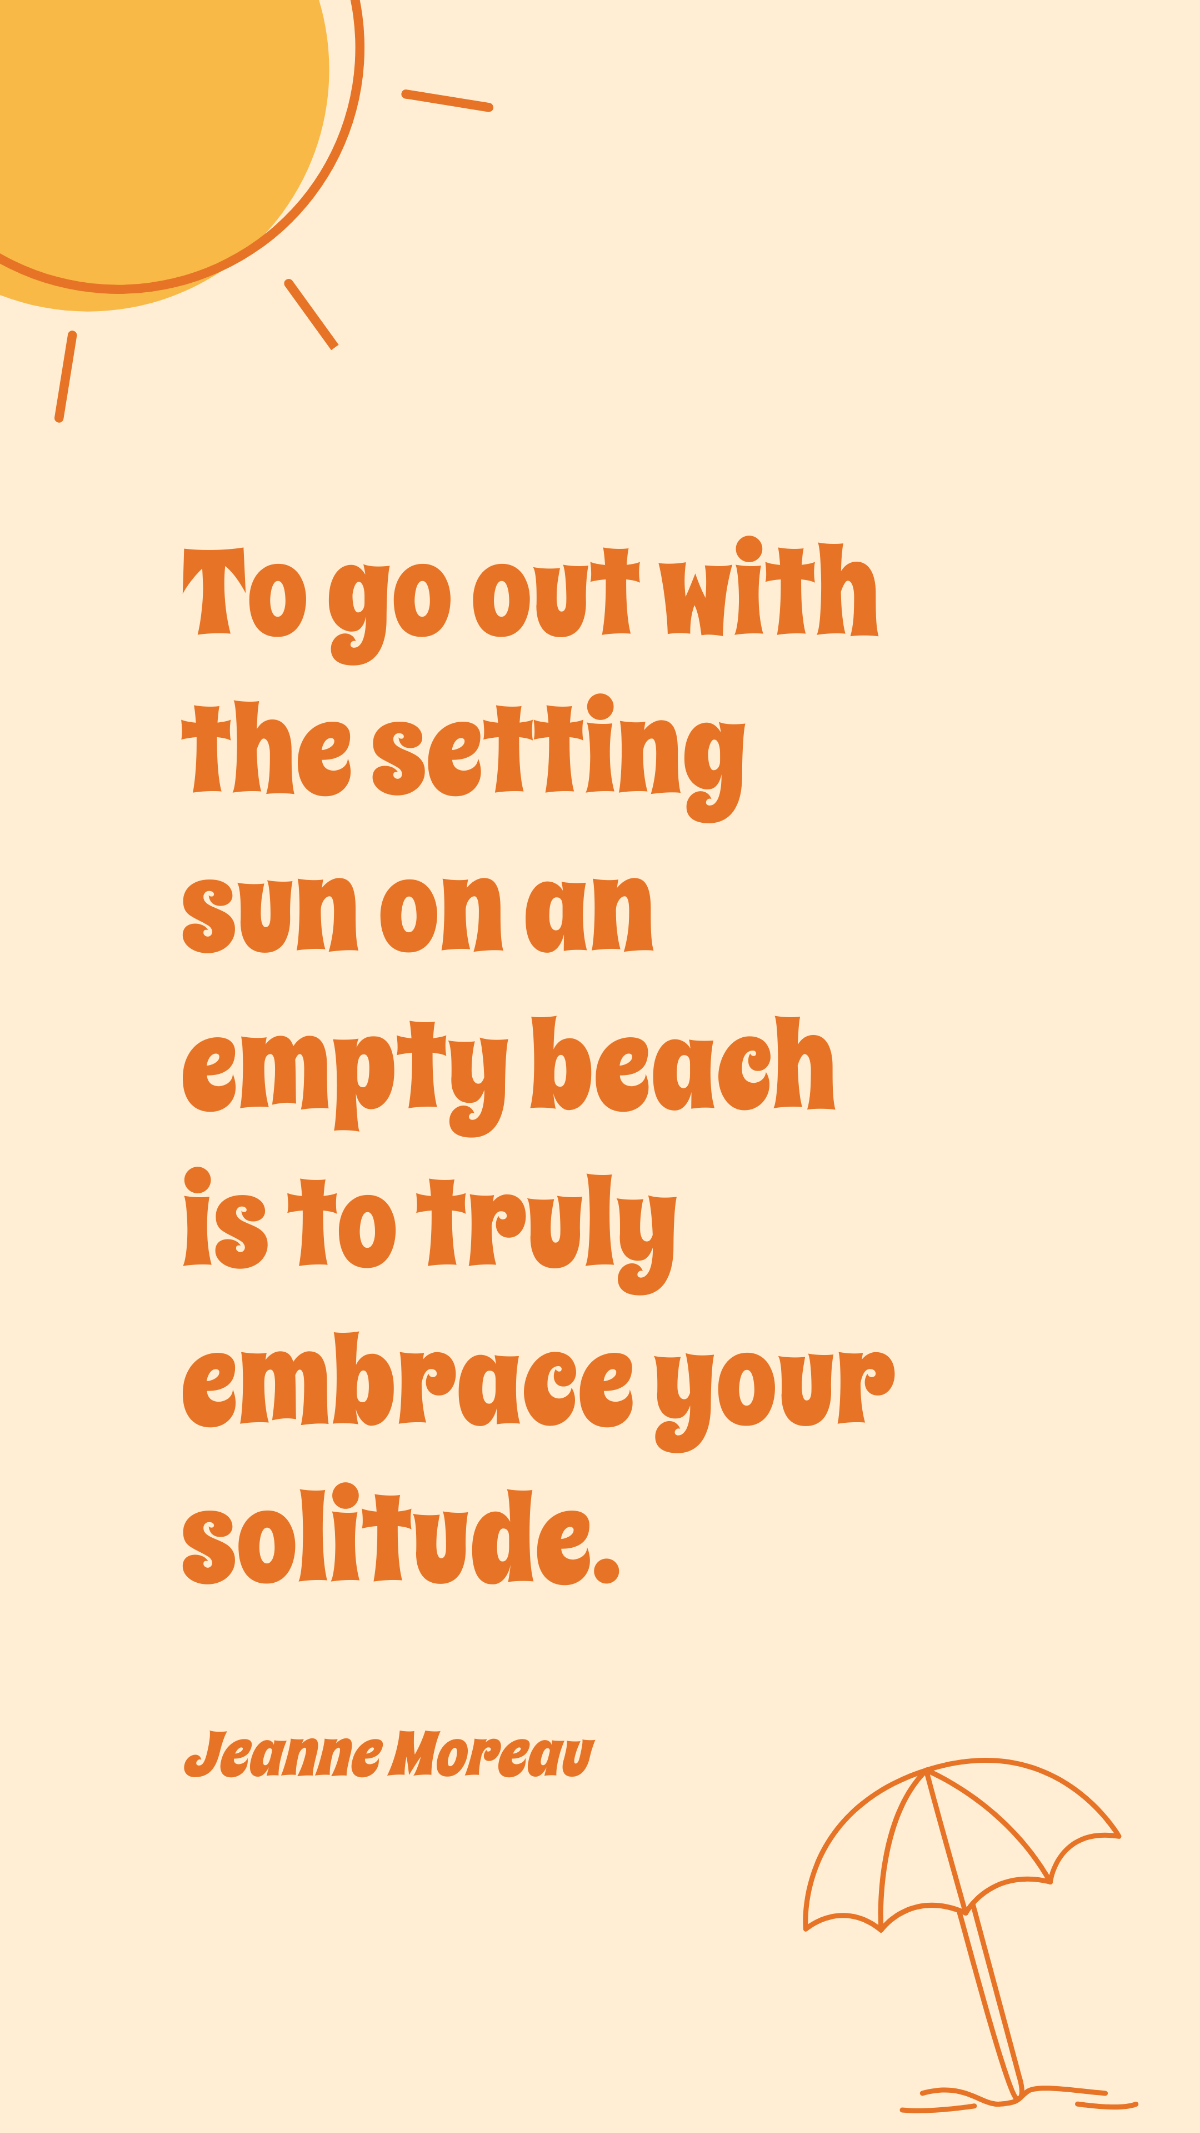 Jeanne Moreau - To go out with the setting sun on an empty beach is to truly embrace your solitude. Template